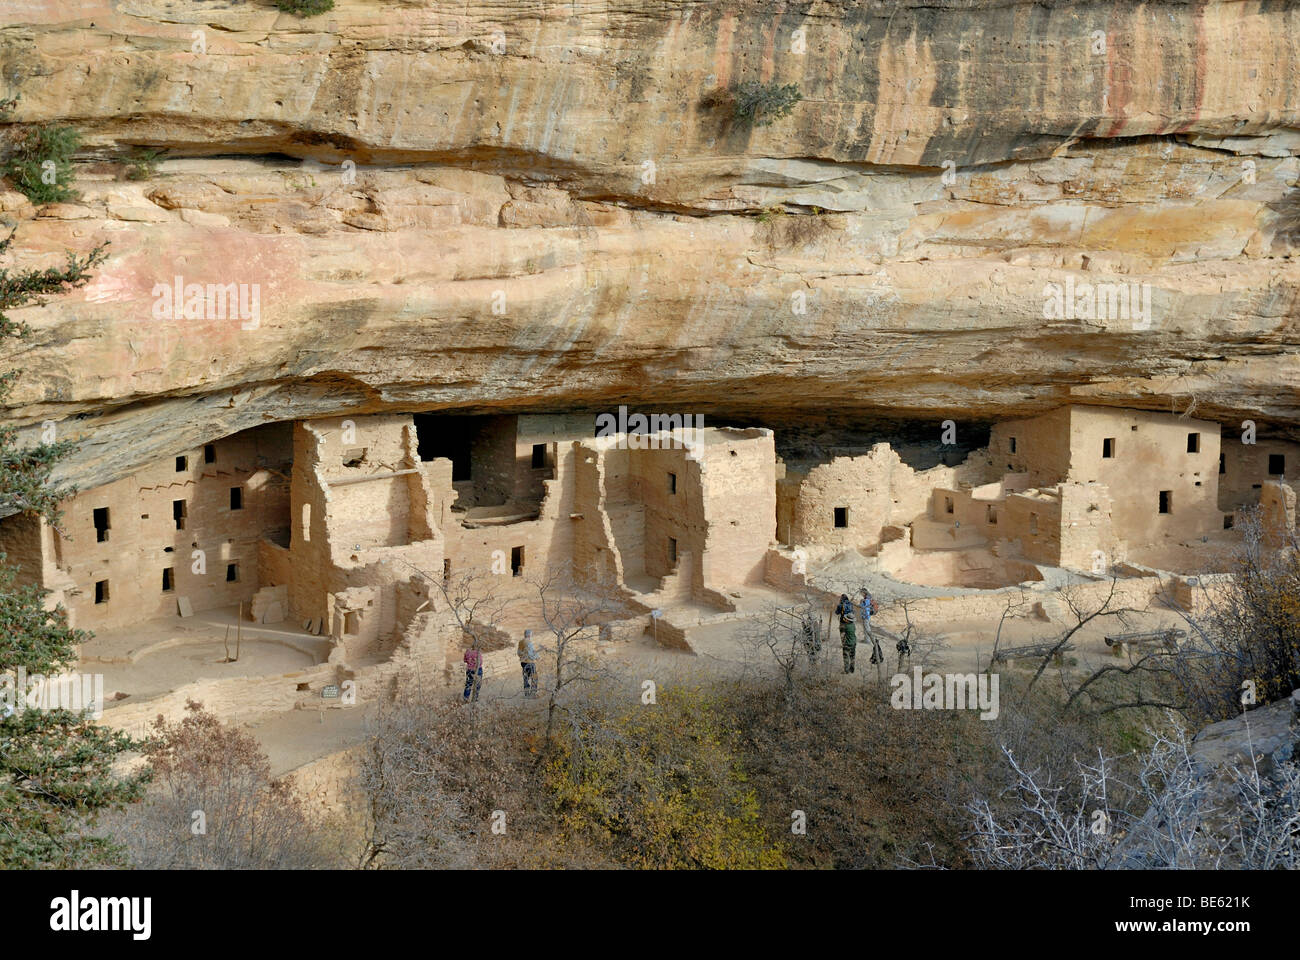 Historic habitation and cult site of the Ancestral Puebloans, Spruce Tree House, about 1200 AD, Mesa Verde National Park, Color Stock Photo